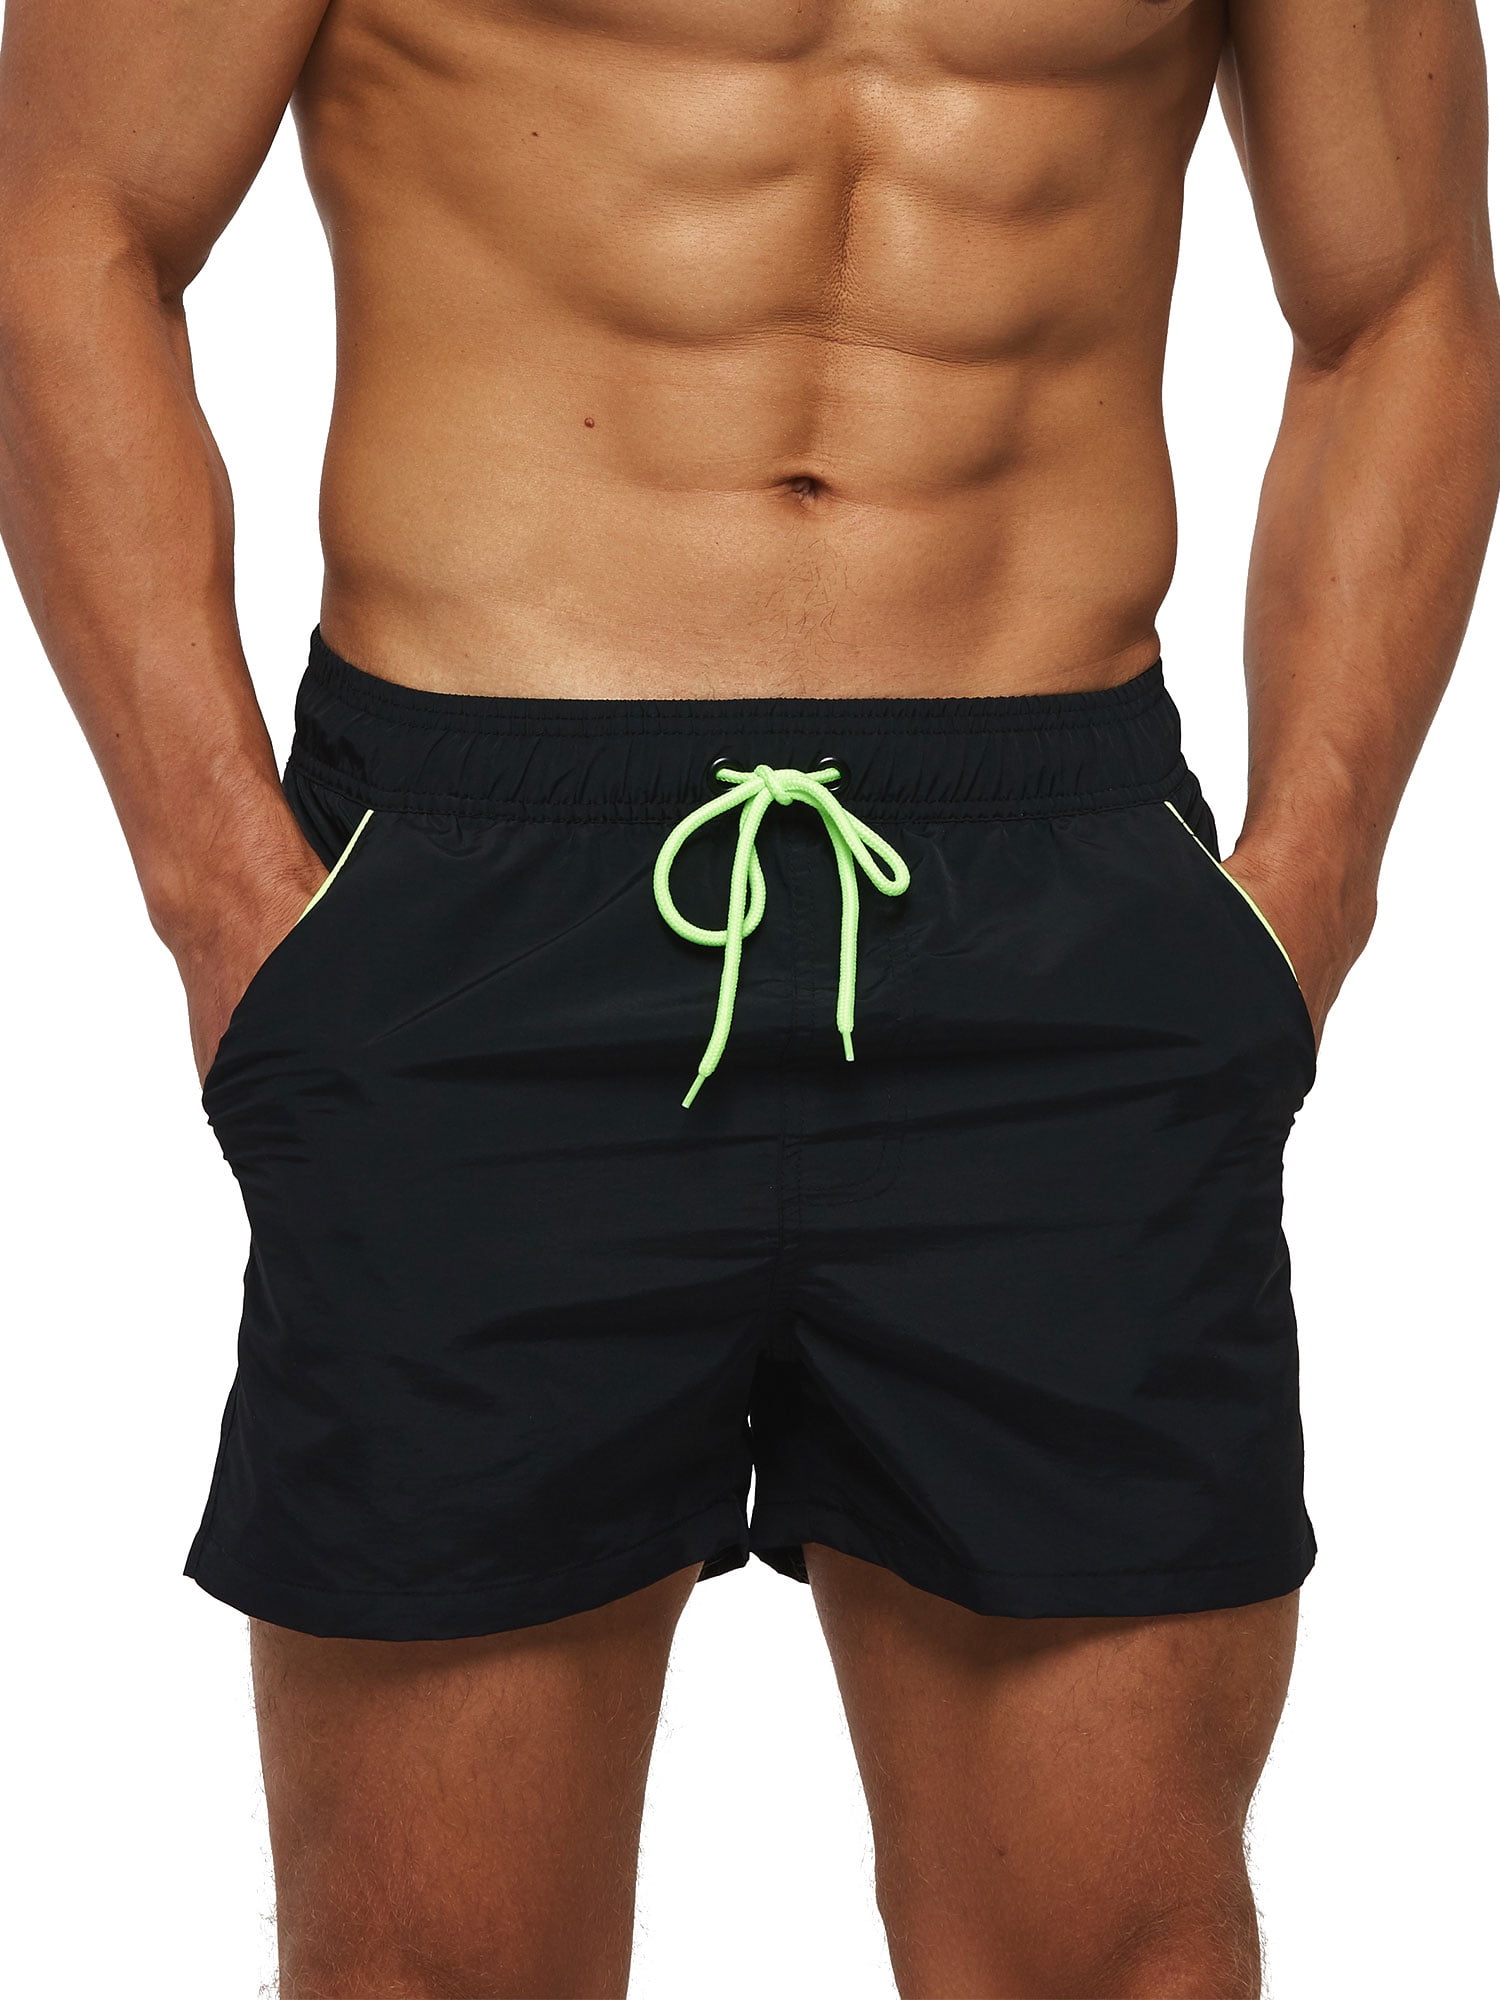 Mens Summer Swim Trunks Cool Quick Dry Beach Board Shorts Bathing Suit Hot Pants